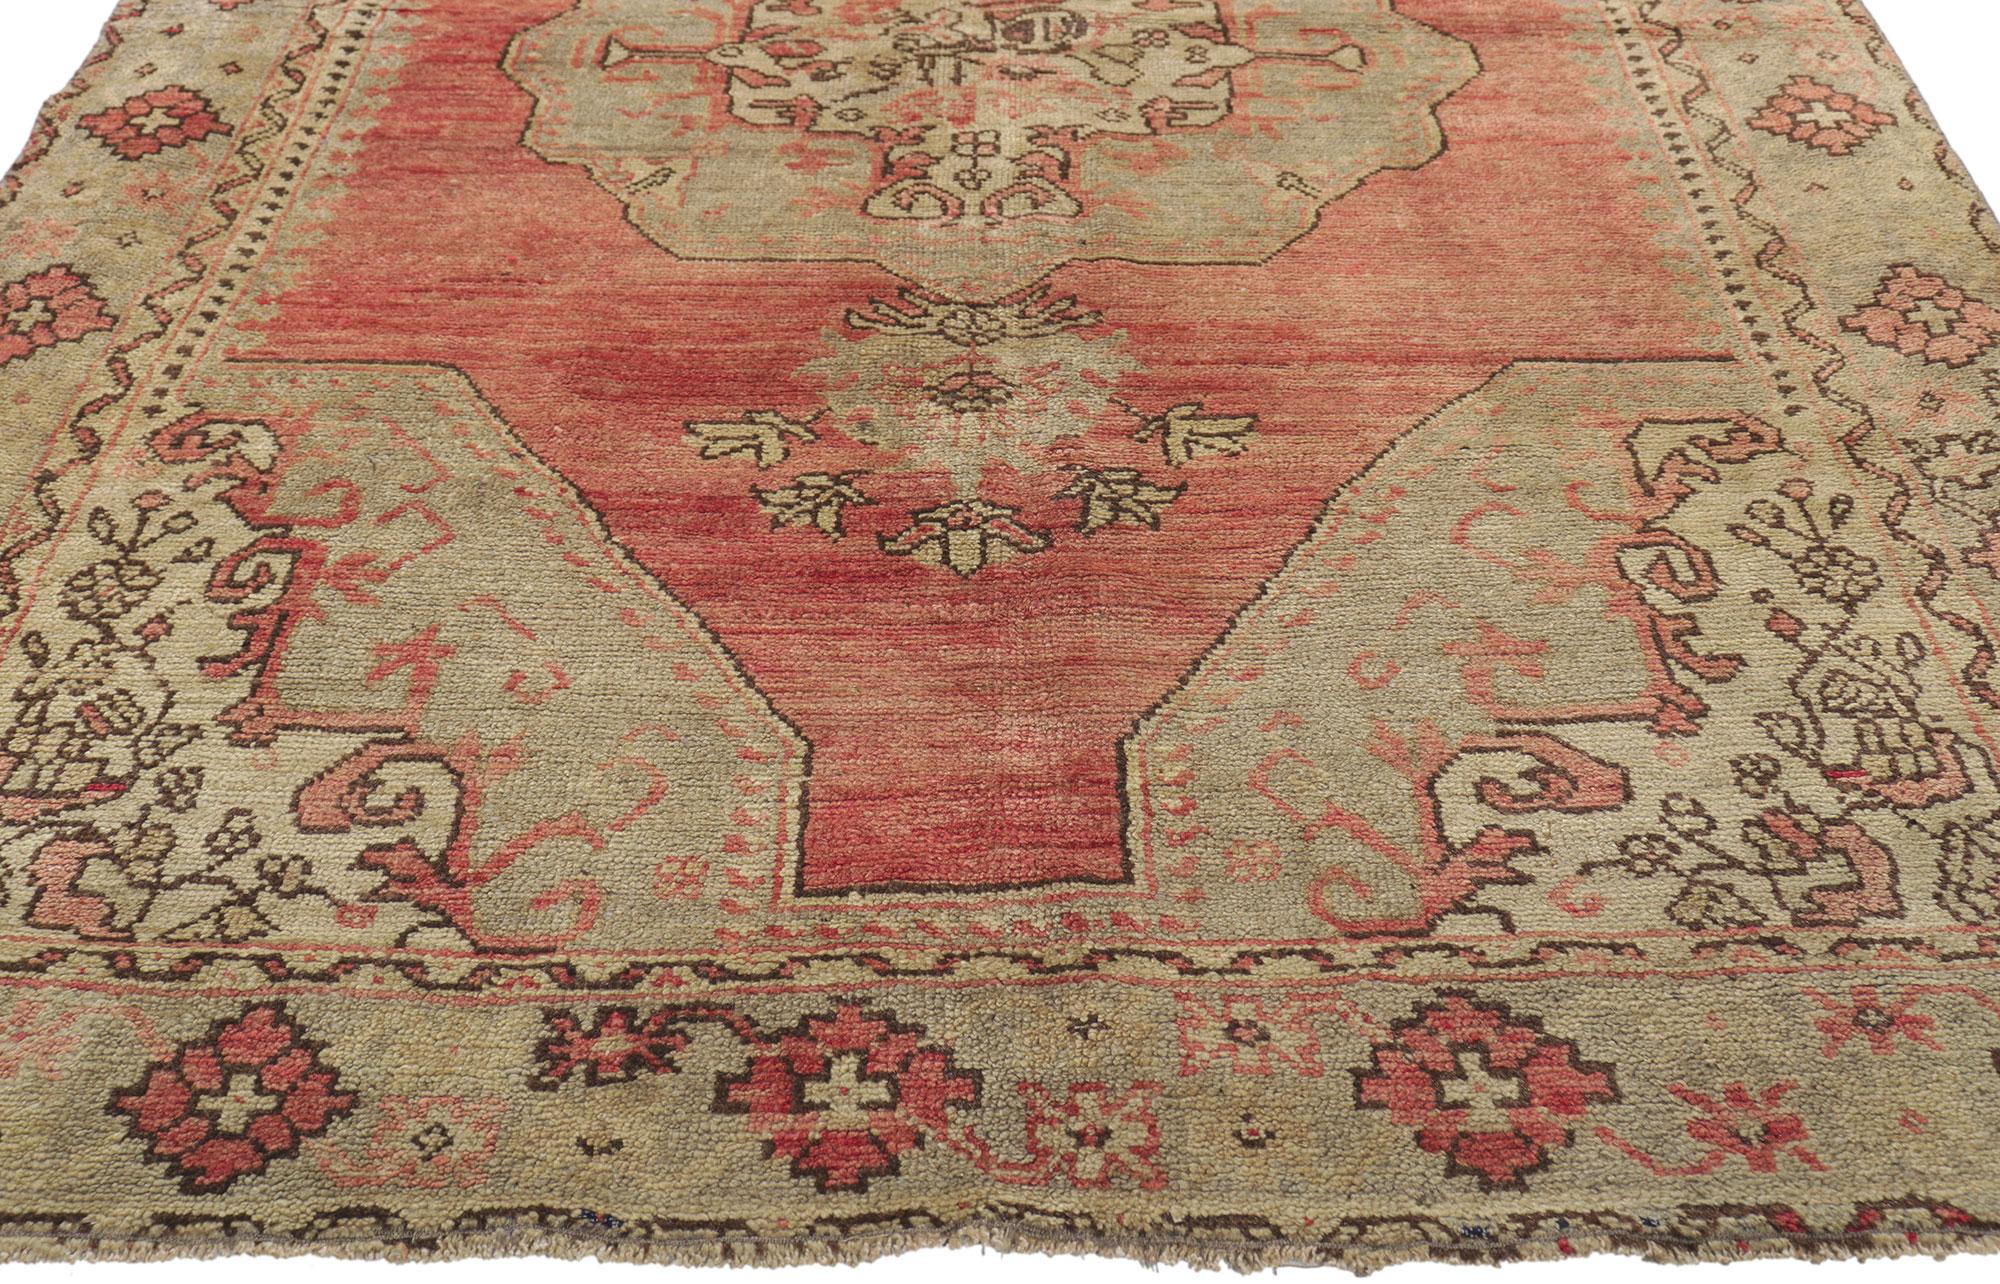 20th Century Vintage Turkish Oushak Rug with Rustic Earth-Tone Colors For Sale